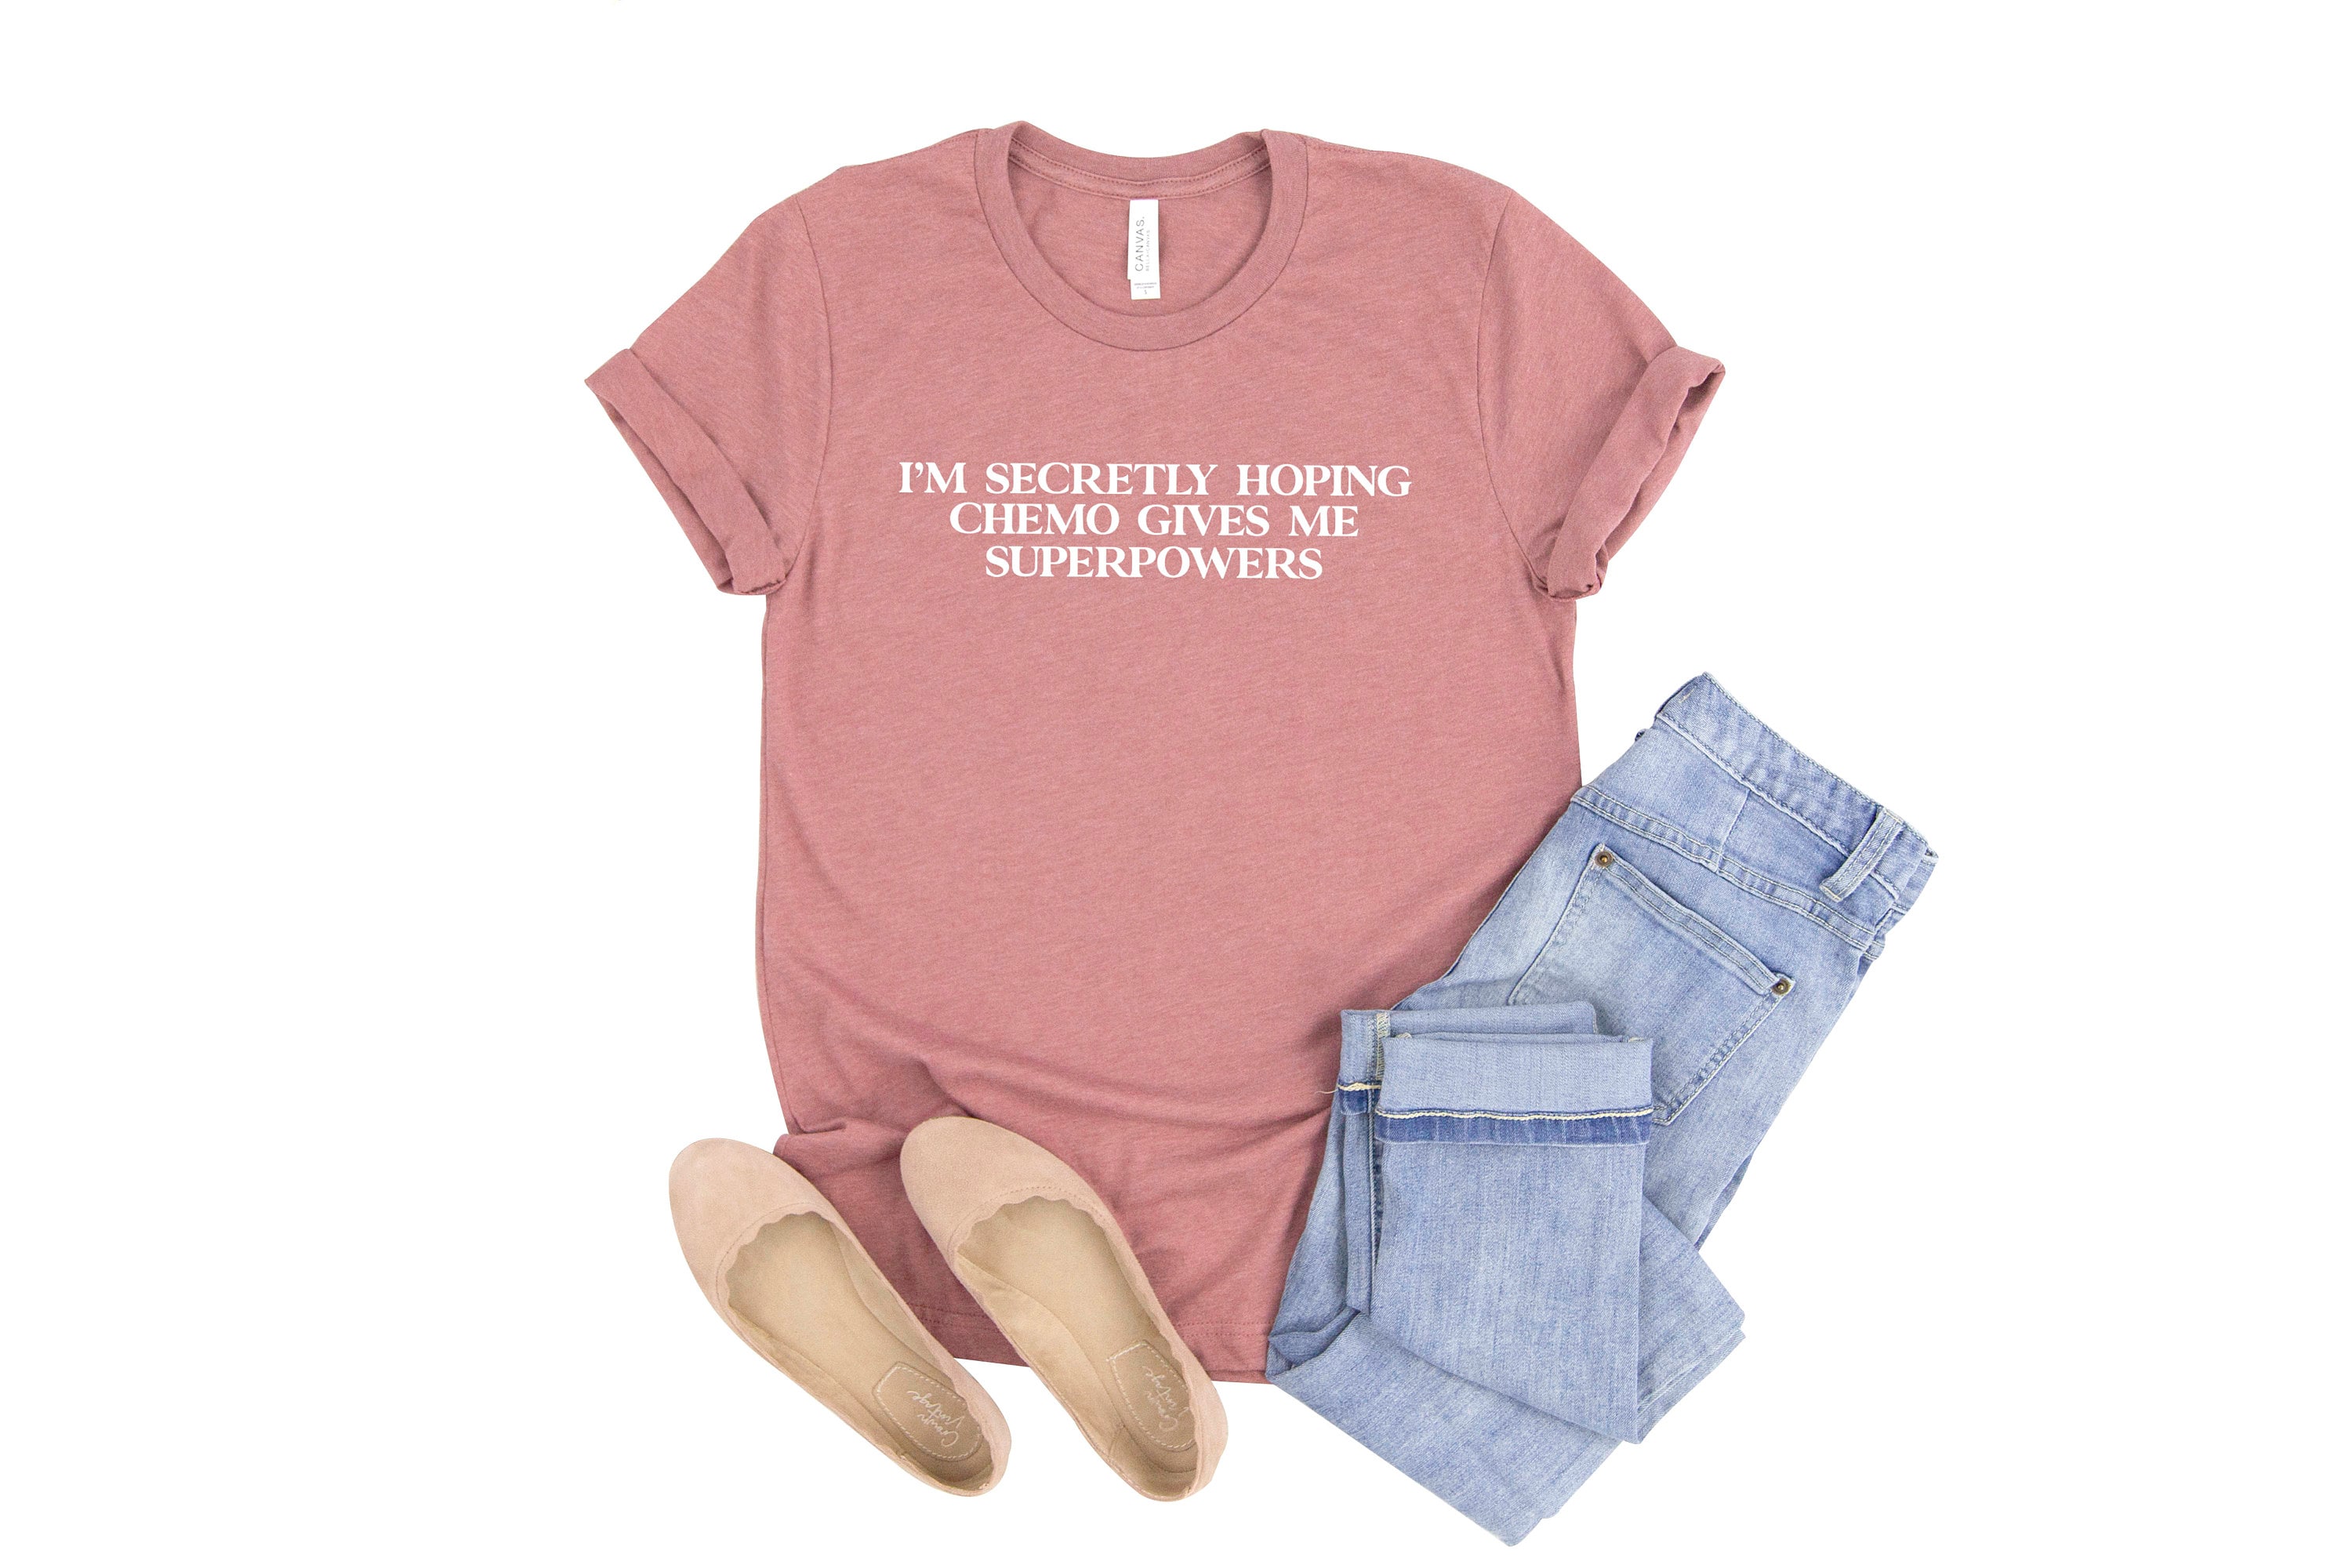 LMBO Laughing My Breast Off! Funny Mastectomy T-Shirt Breast